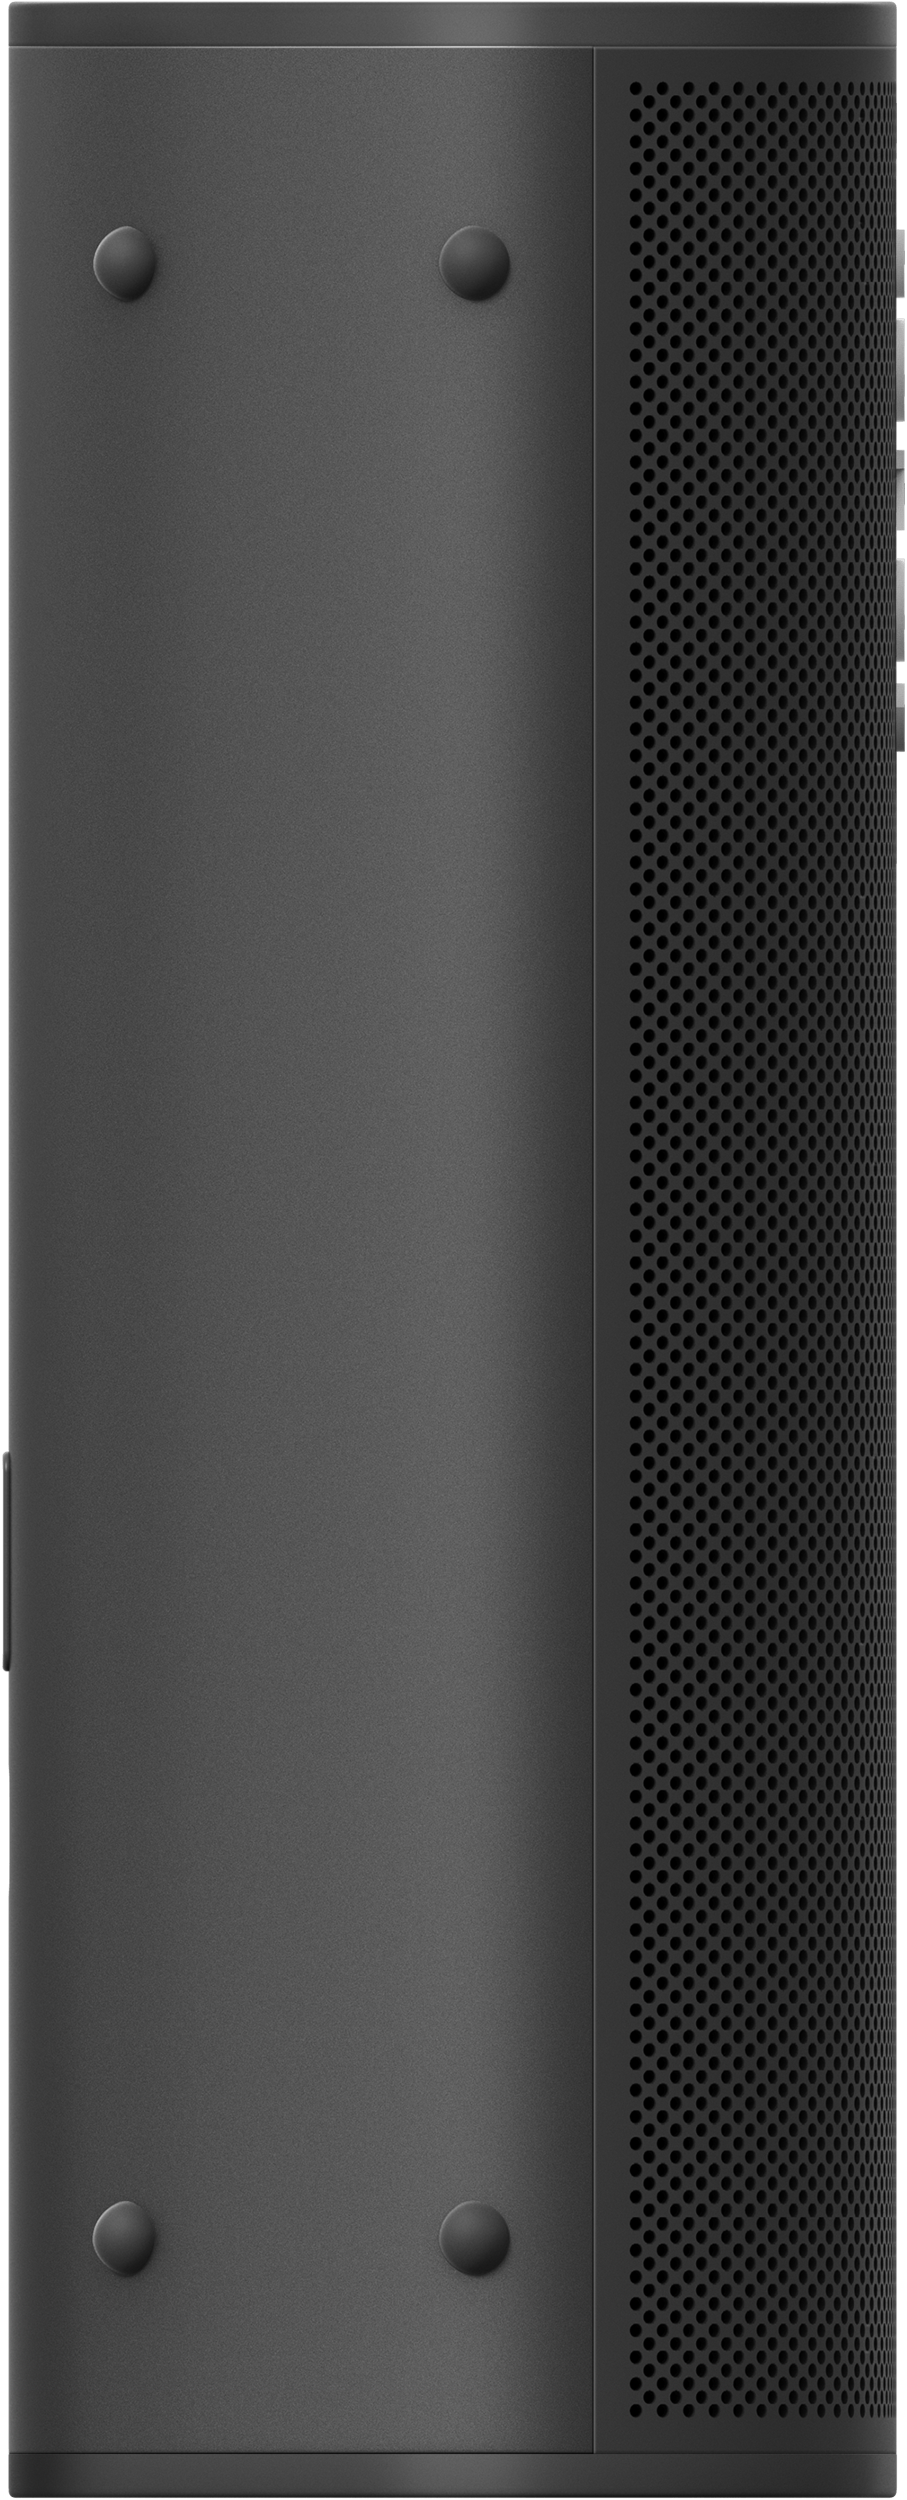 a close up of a black speaker with holes in it on a white background .